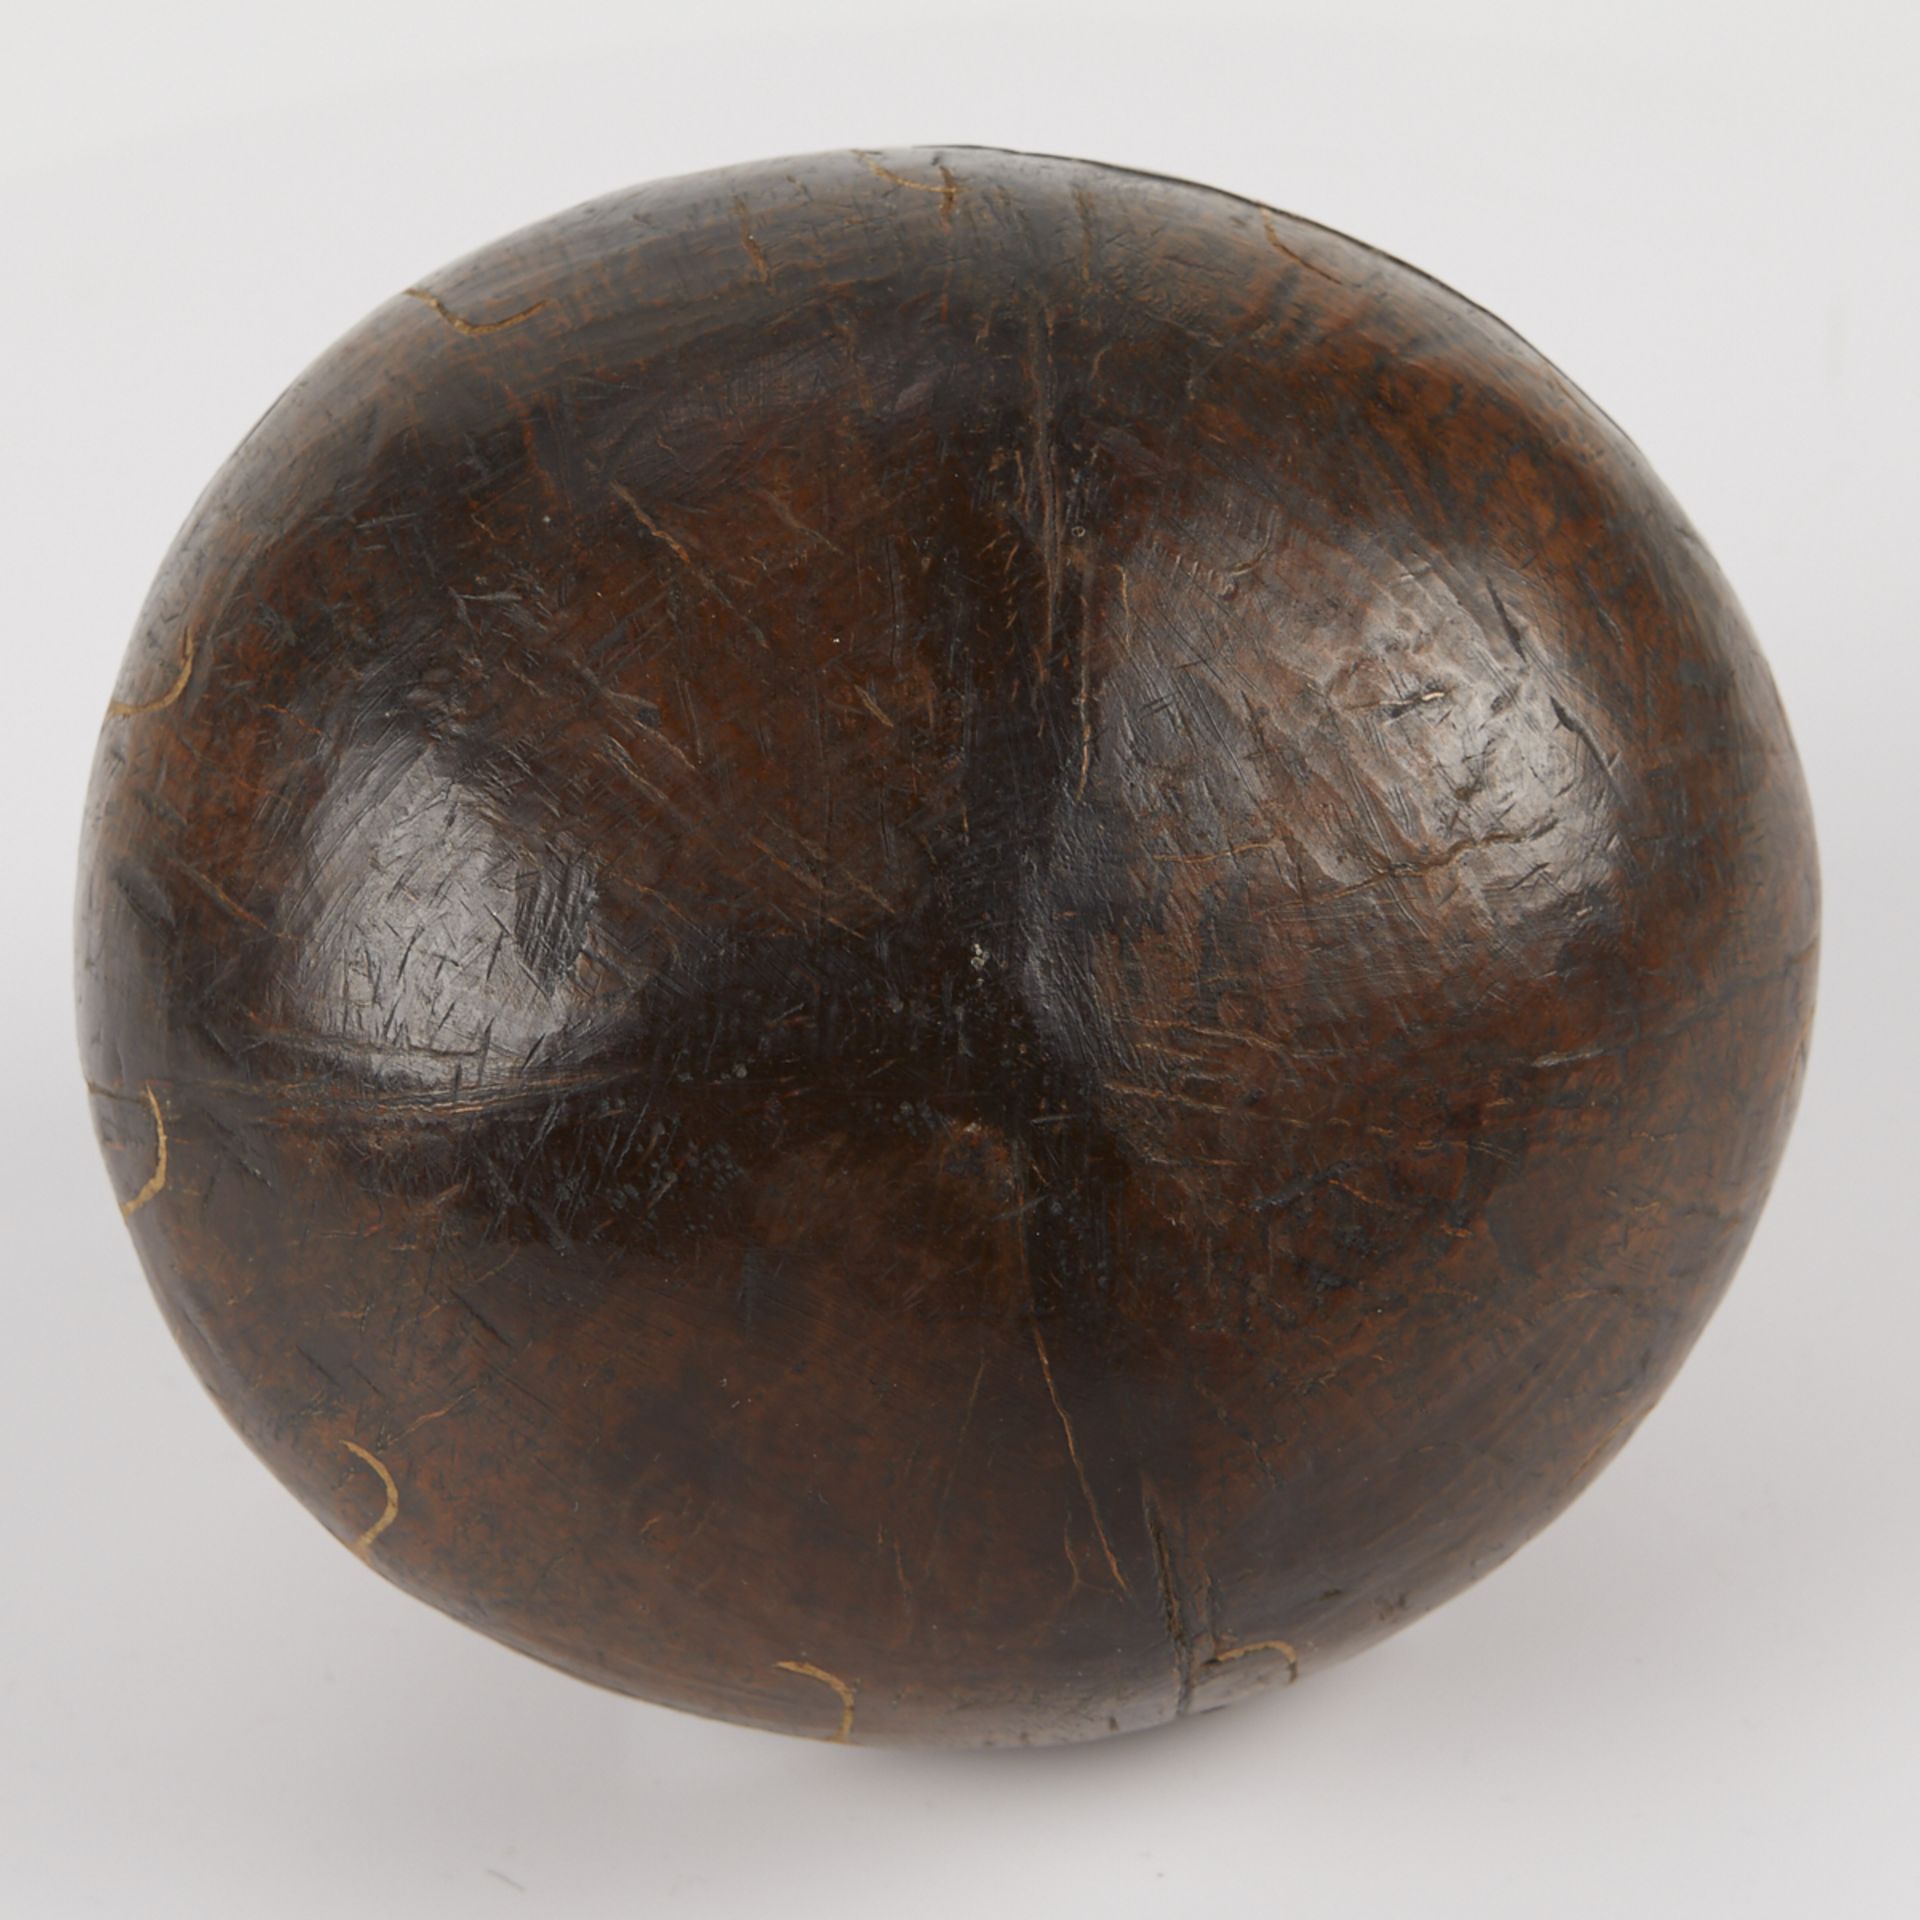 Early New Guinea Carved Coconut Vessel - Image 7 of 7